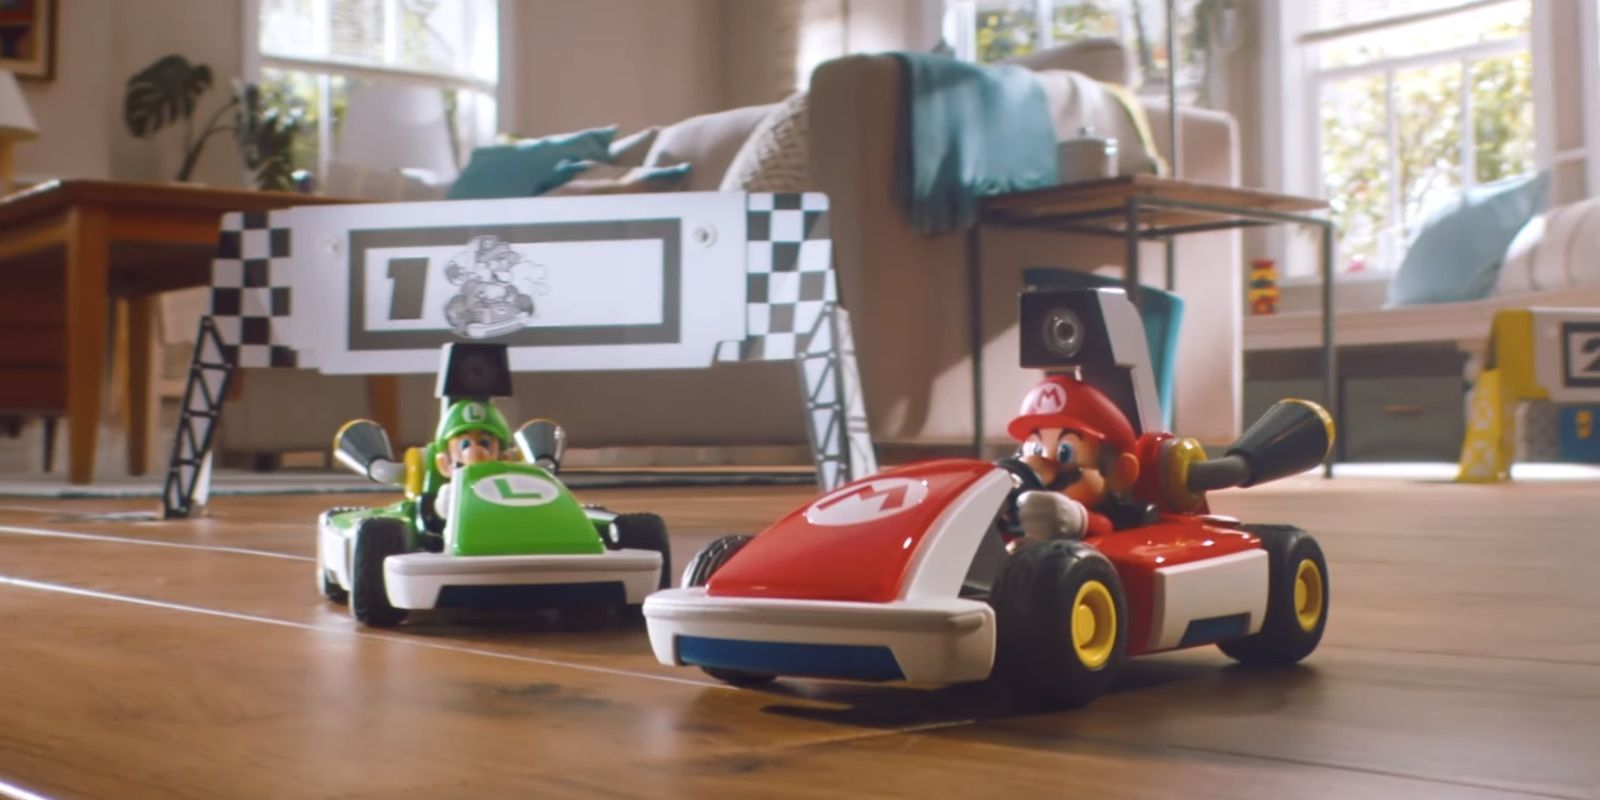 The physical Mario and Luigi toy karts from Mario Kart Live: Home Circuit